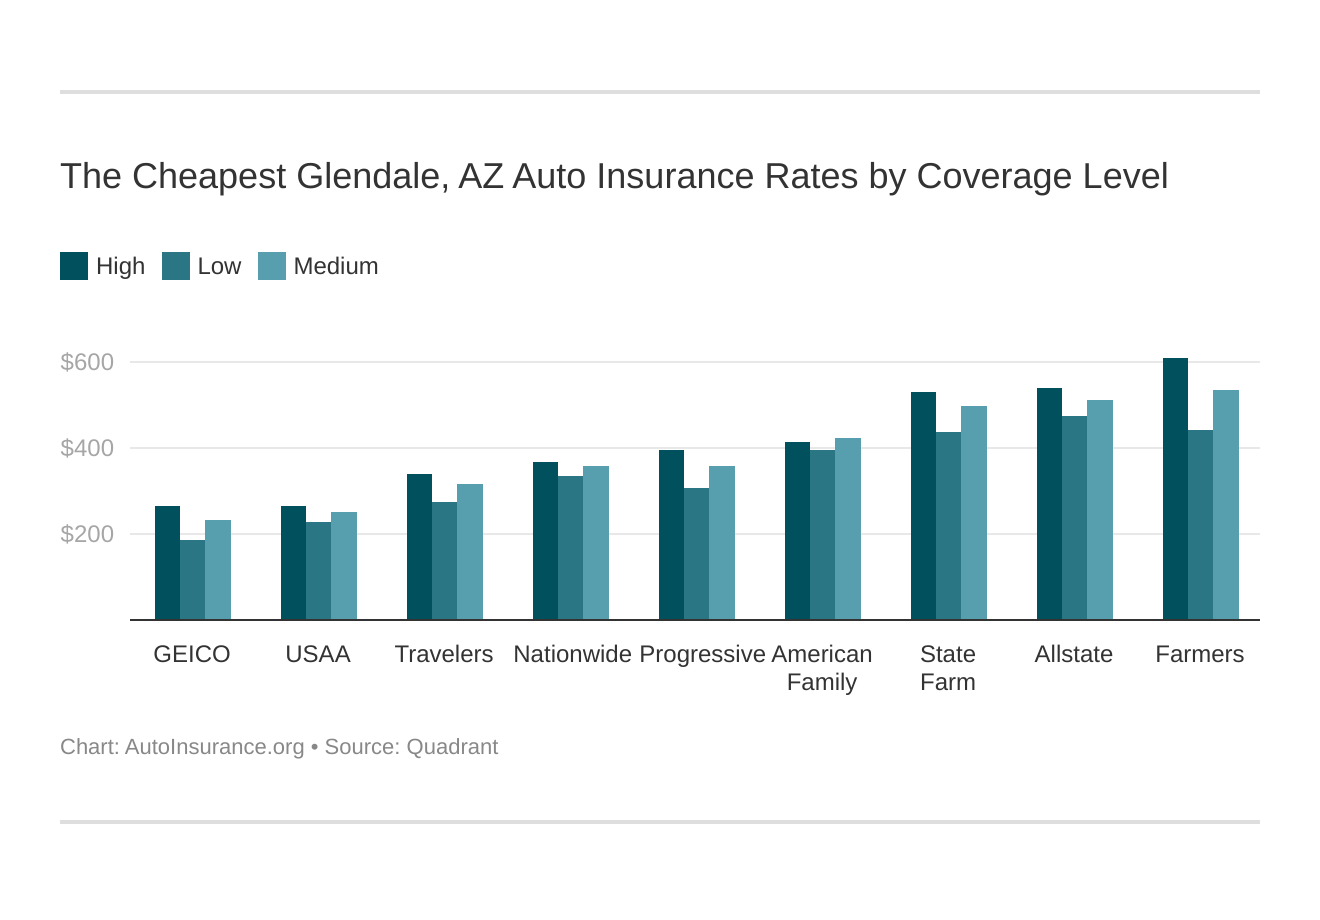 The Cheapest Glendale, AZ Auto Insurance Rates by Coverage Level